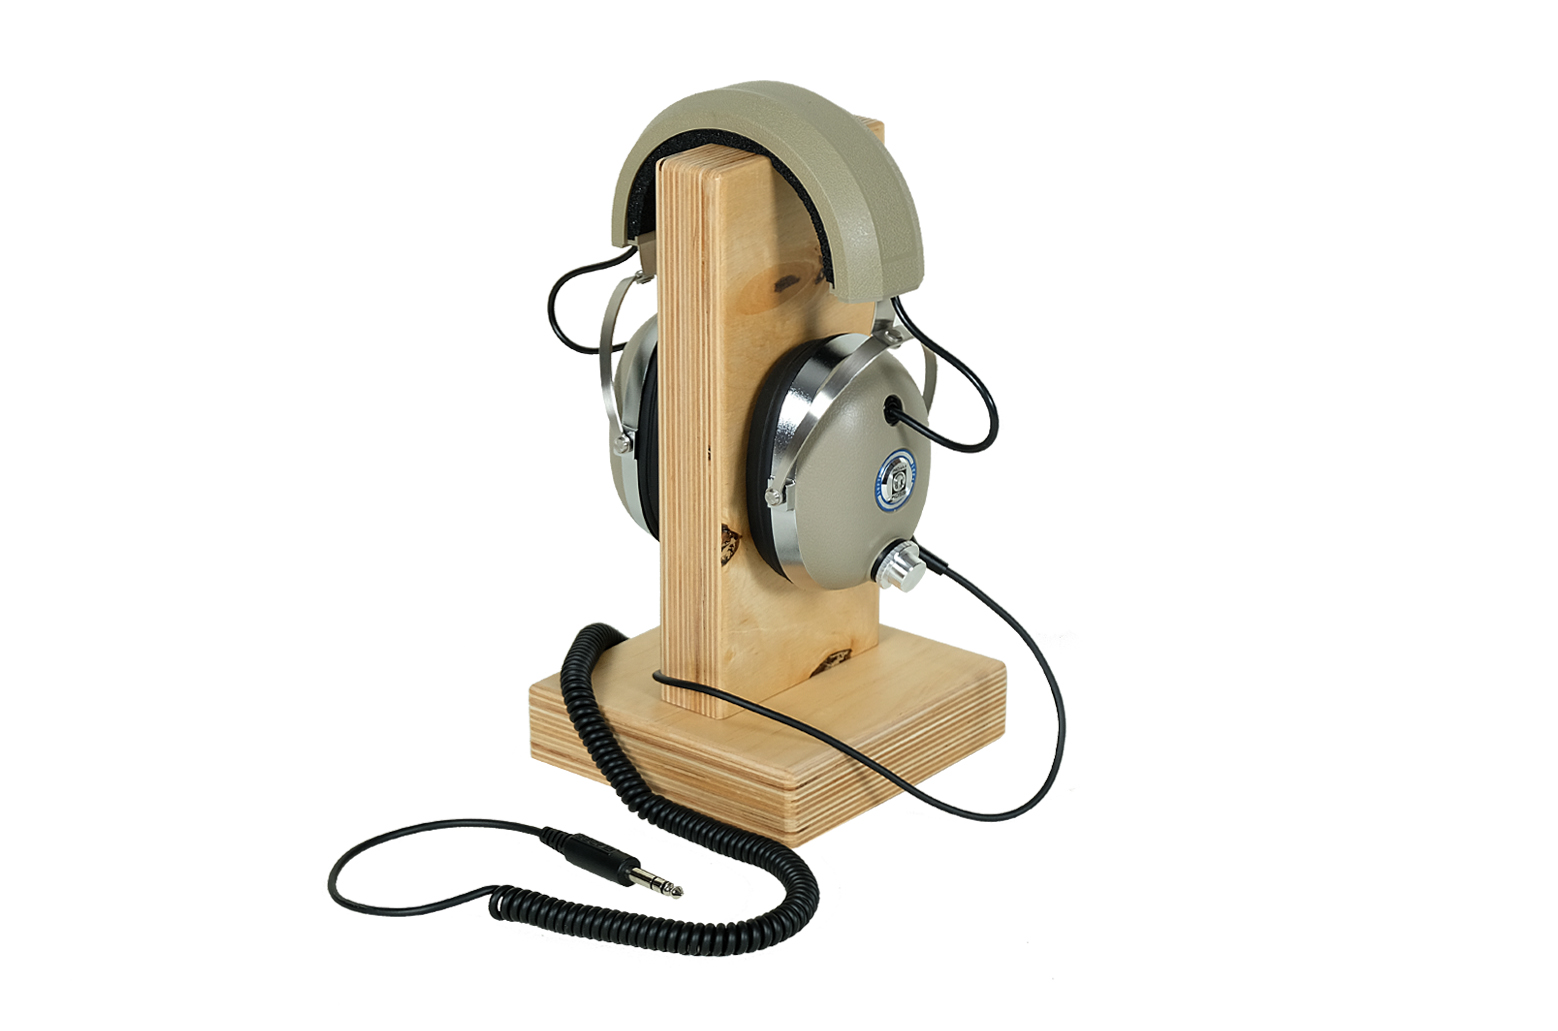 Koss PRO AA headphones. Classic Vintage. Stand included in the price.